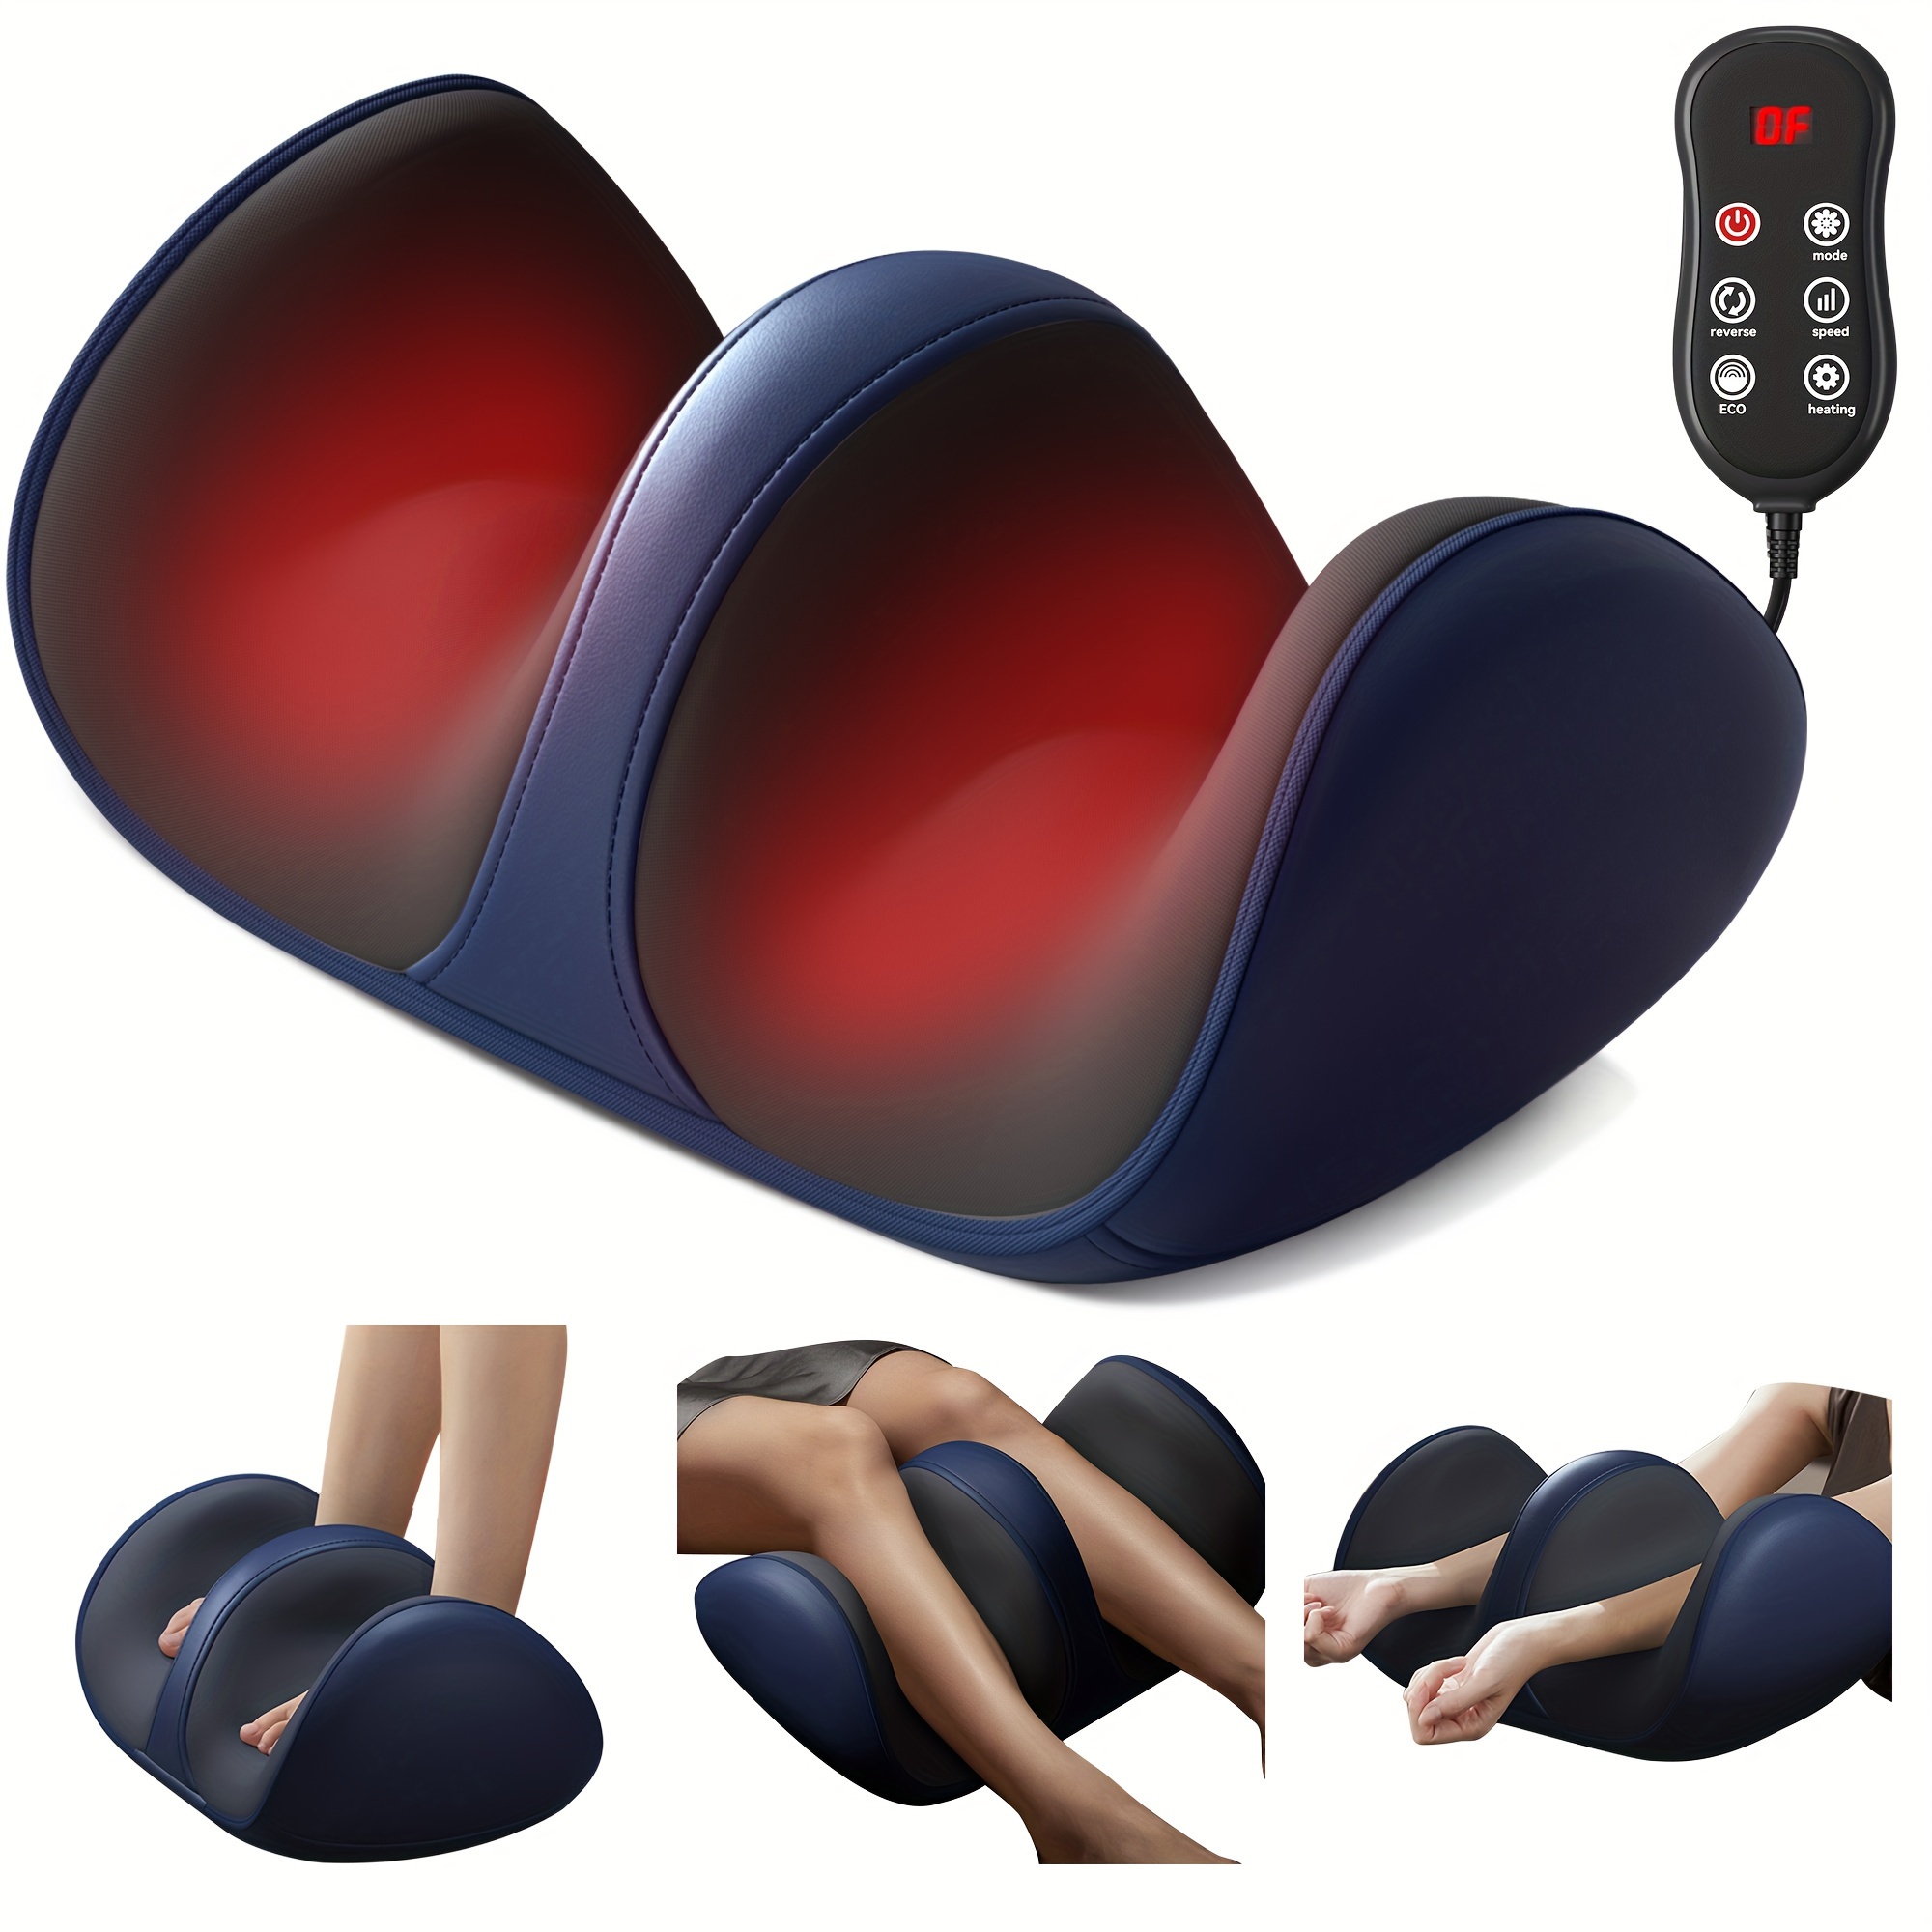 

Cordless 3d Shiatsu Foot And Leg Massager With Heat, Rechargeable Lithium Battery, Usb-c Charging, Deep-kneading Massage For Calves, Thighs, And Arms, Unscented, 4v-12v